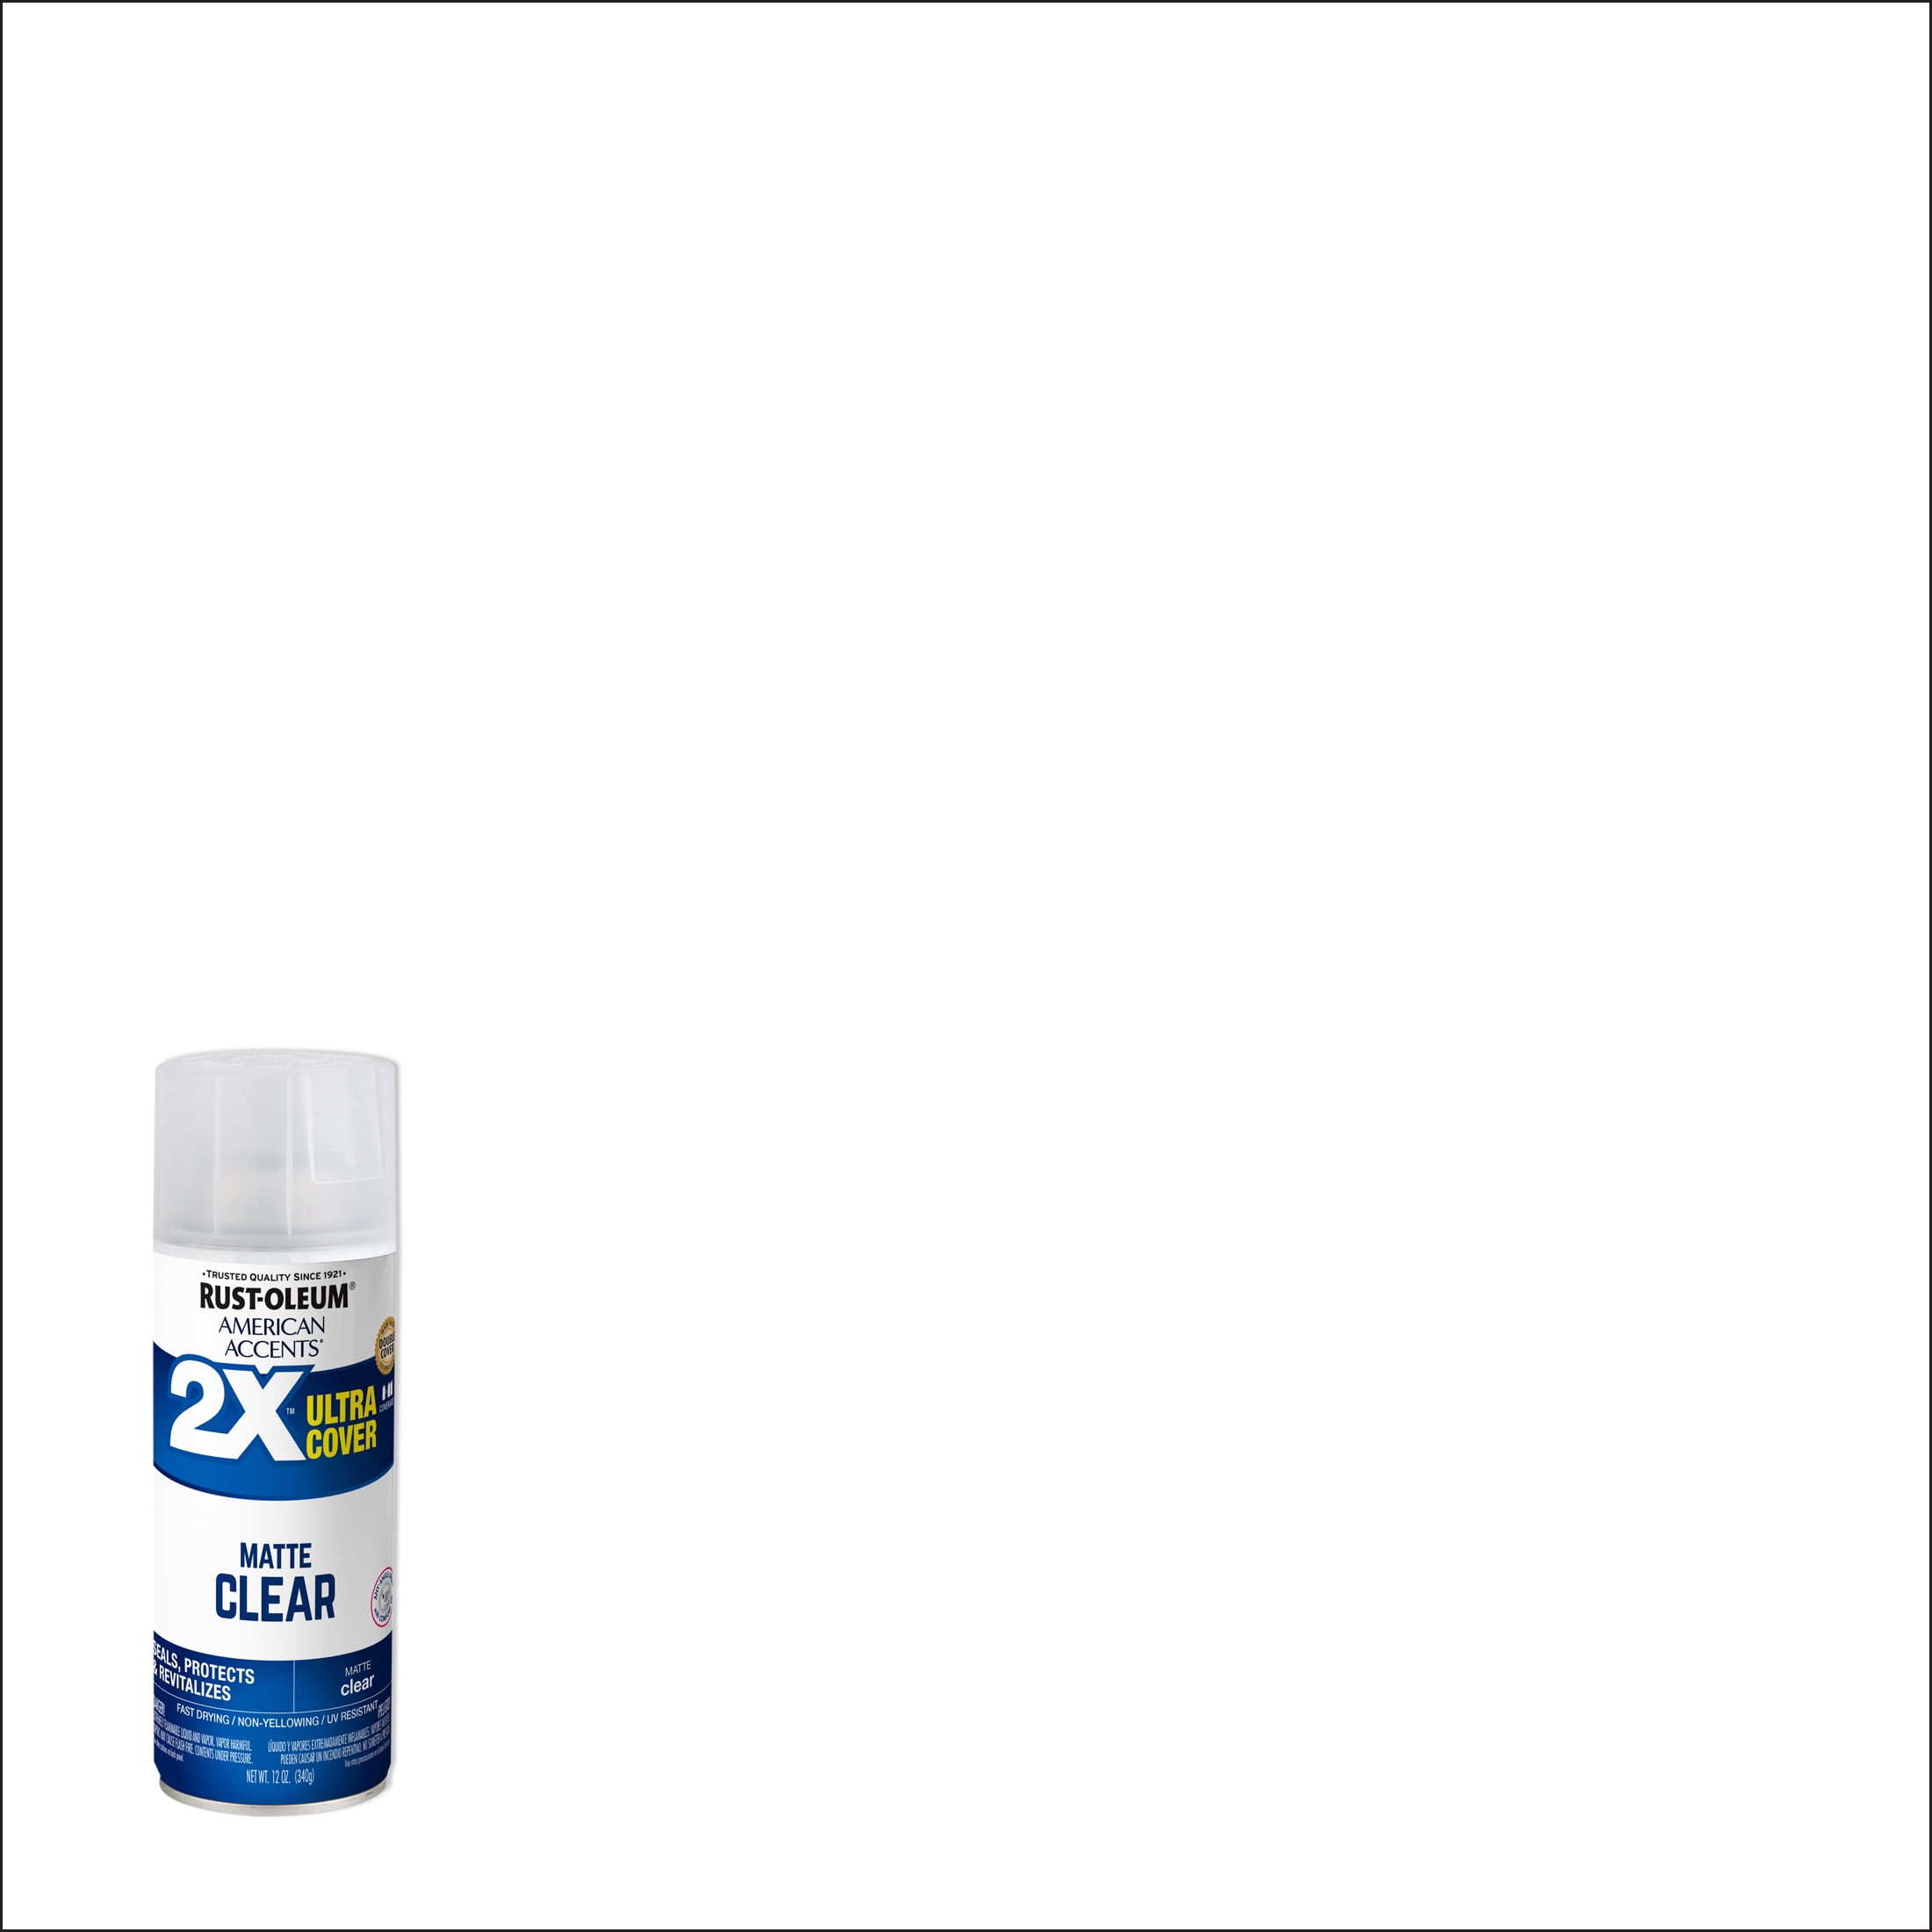 Clear, Rust-Oleum American Accents 2X Ultra Cover Matte Spray Paint- 12 oz